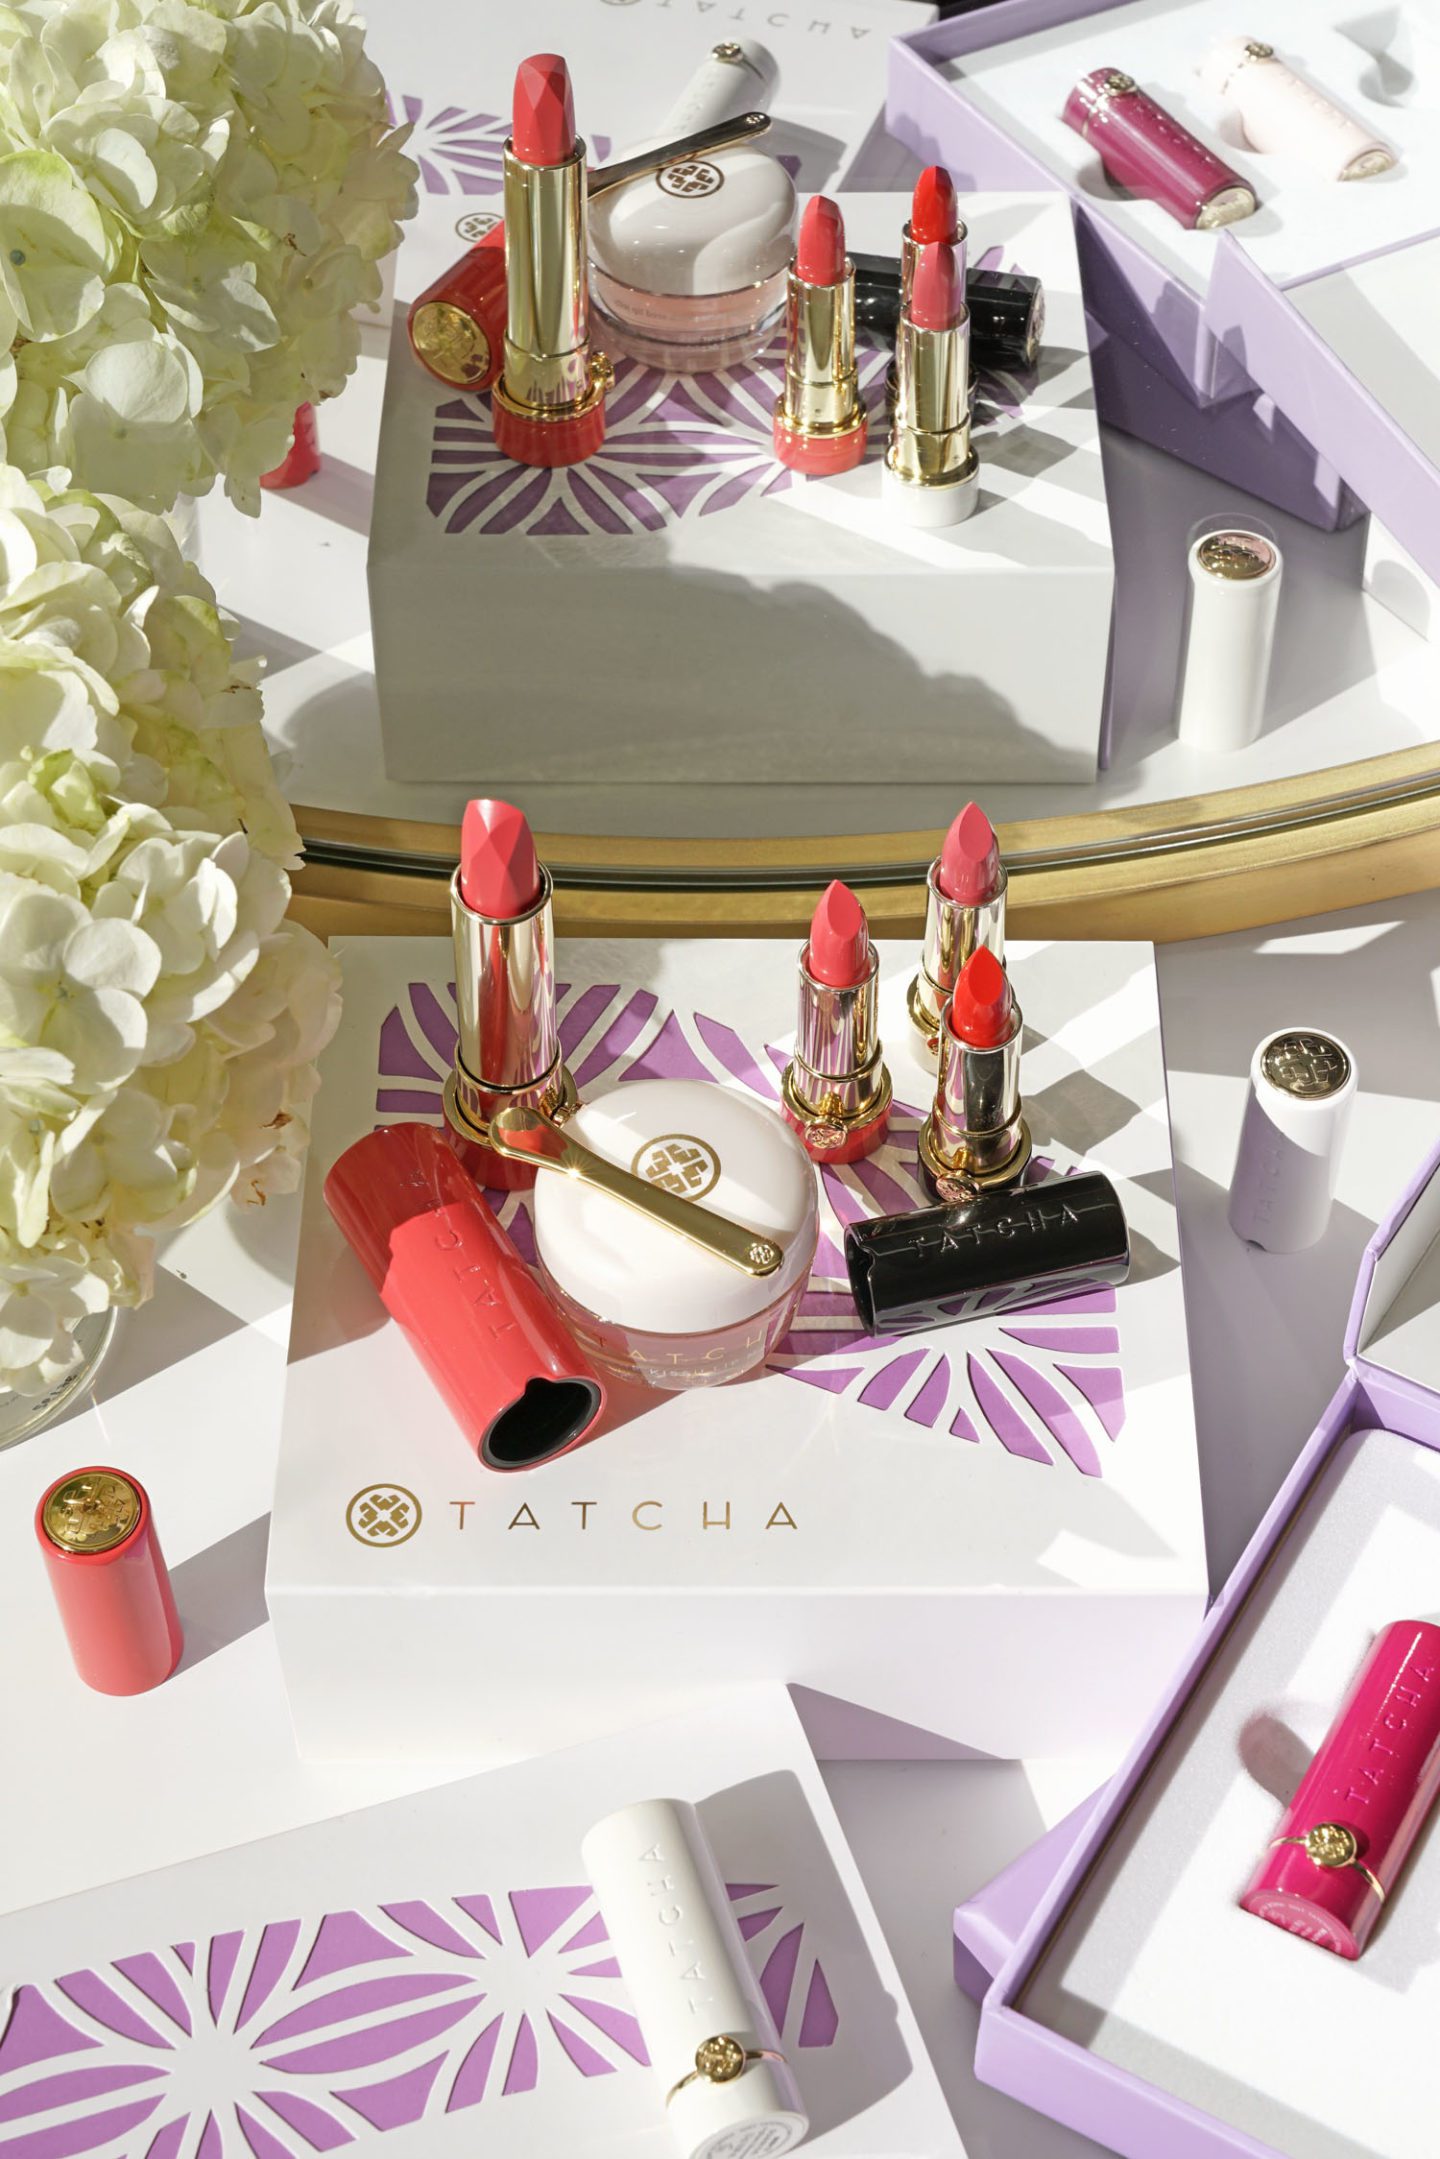 Tatcha Holiday Lip 2018 Sets Review | The Beauty Look Book